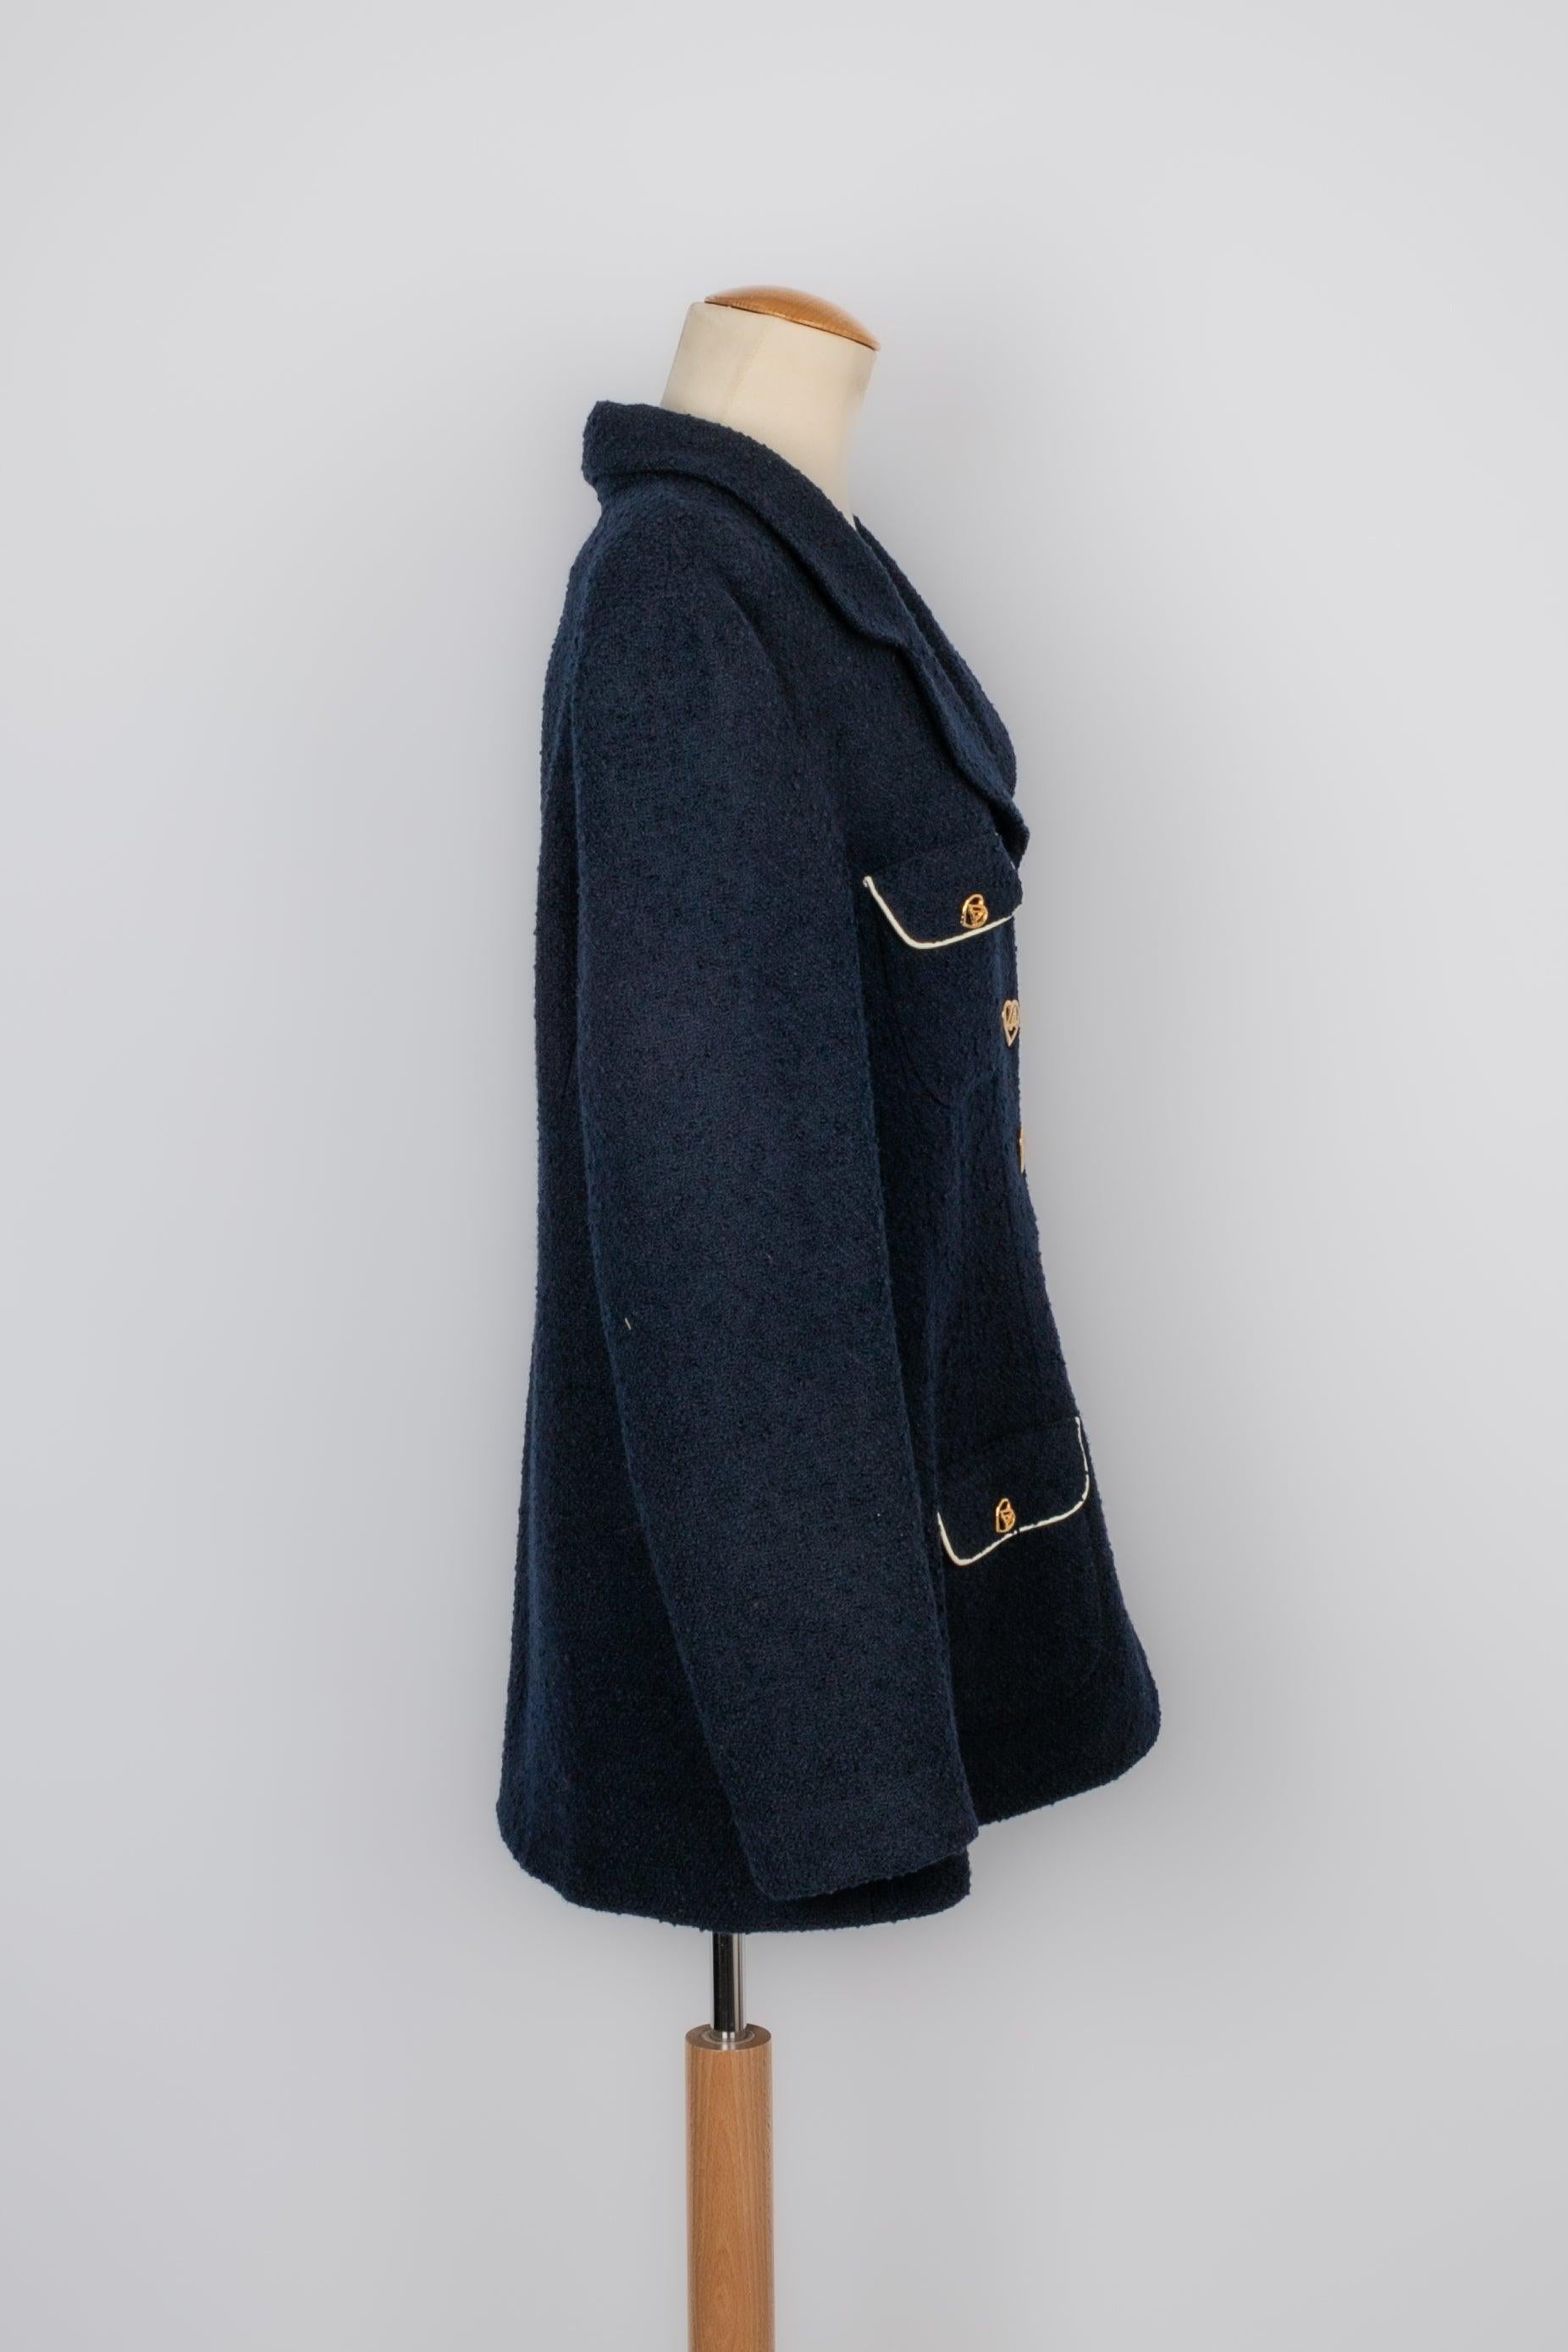 Azzaro - (Made in France) Navy blue wool jacket and gold metal buttons. Size indicated 4US.

Additional information:
Condition: Good condition
Dimensions: Shoulder width: 48 cm - Chest: 55 cm - Sleeve length: 60 cm - Length: 71 cm

Seller Reference: